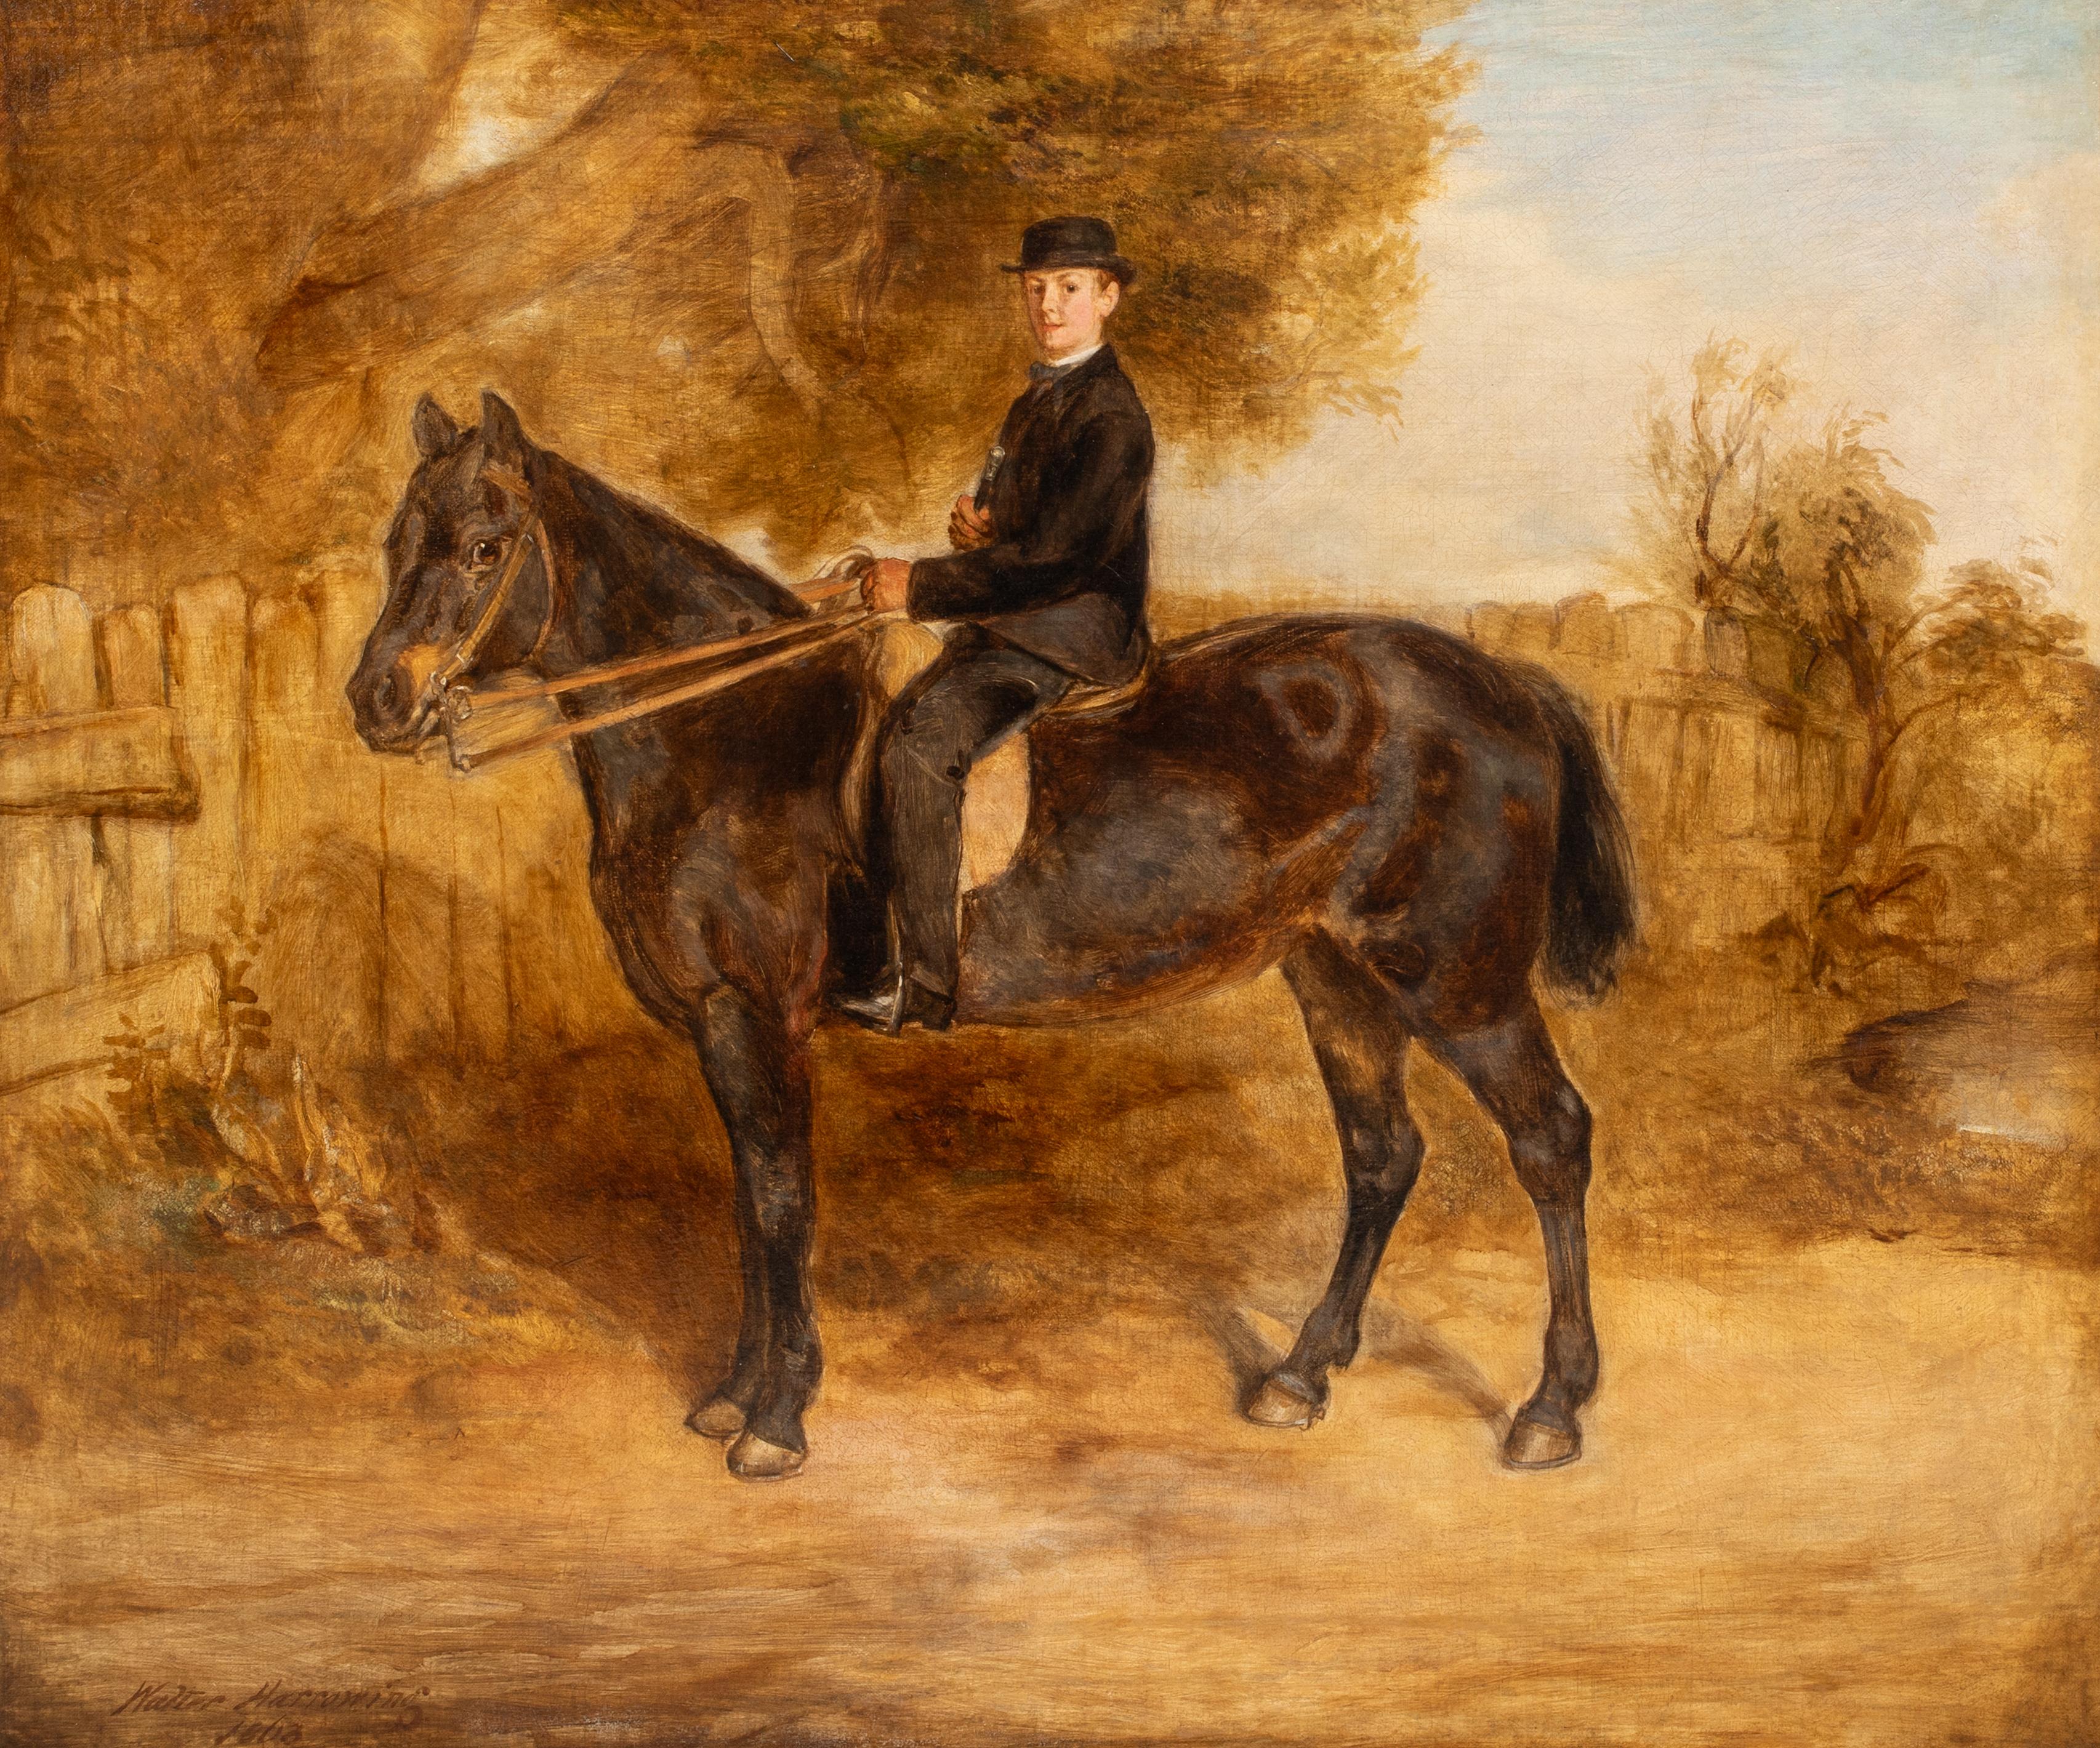 Portrait Of A Boy & His Horse, 19th Century 

Walter Harrowing (1838-1913)

Large 19th Century portrait of a young boy and his horse in a landscape, oil on canvas by Walter Harrowing. Excellent quality and condition of the artists work. Signed and